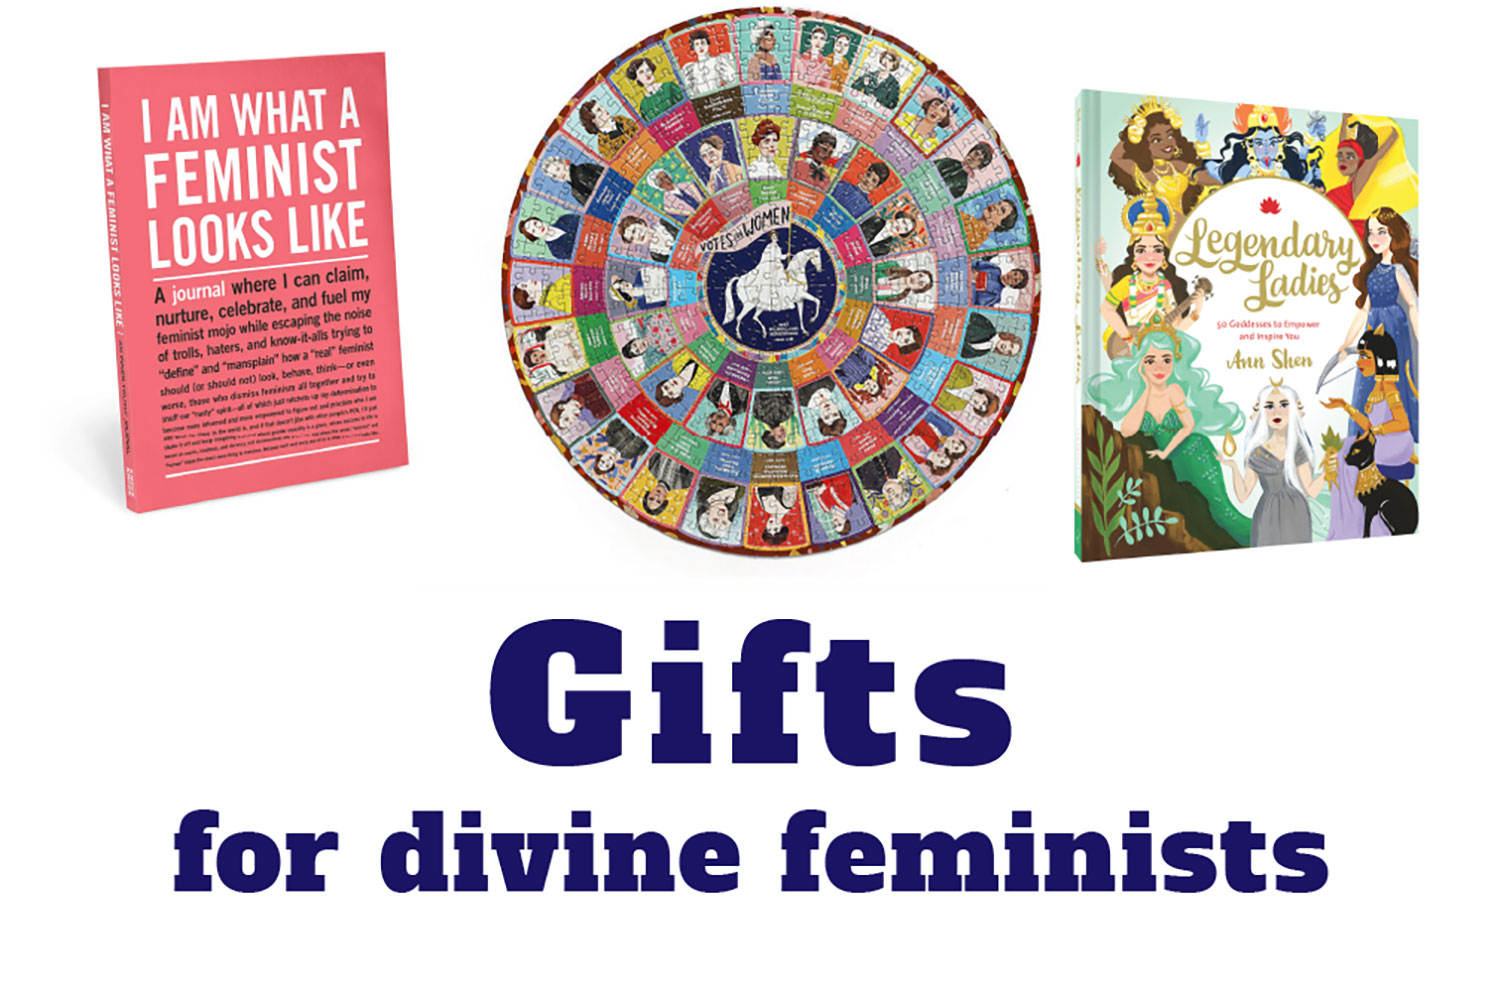 Gifts for divine feminists.